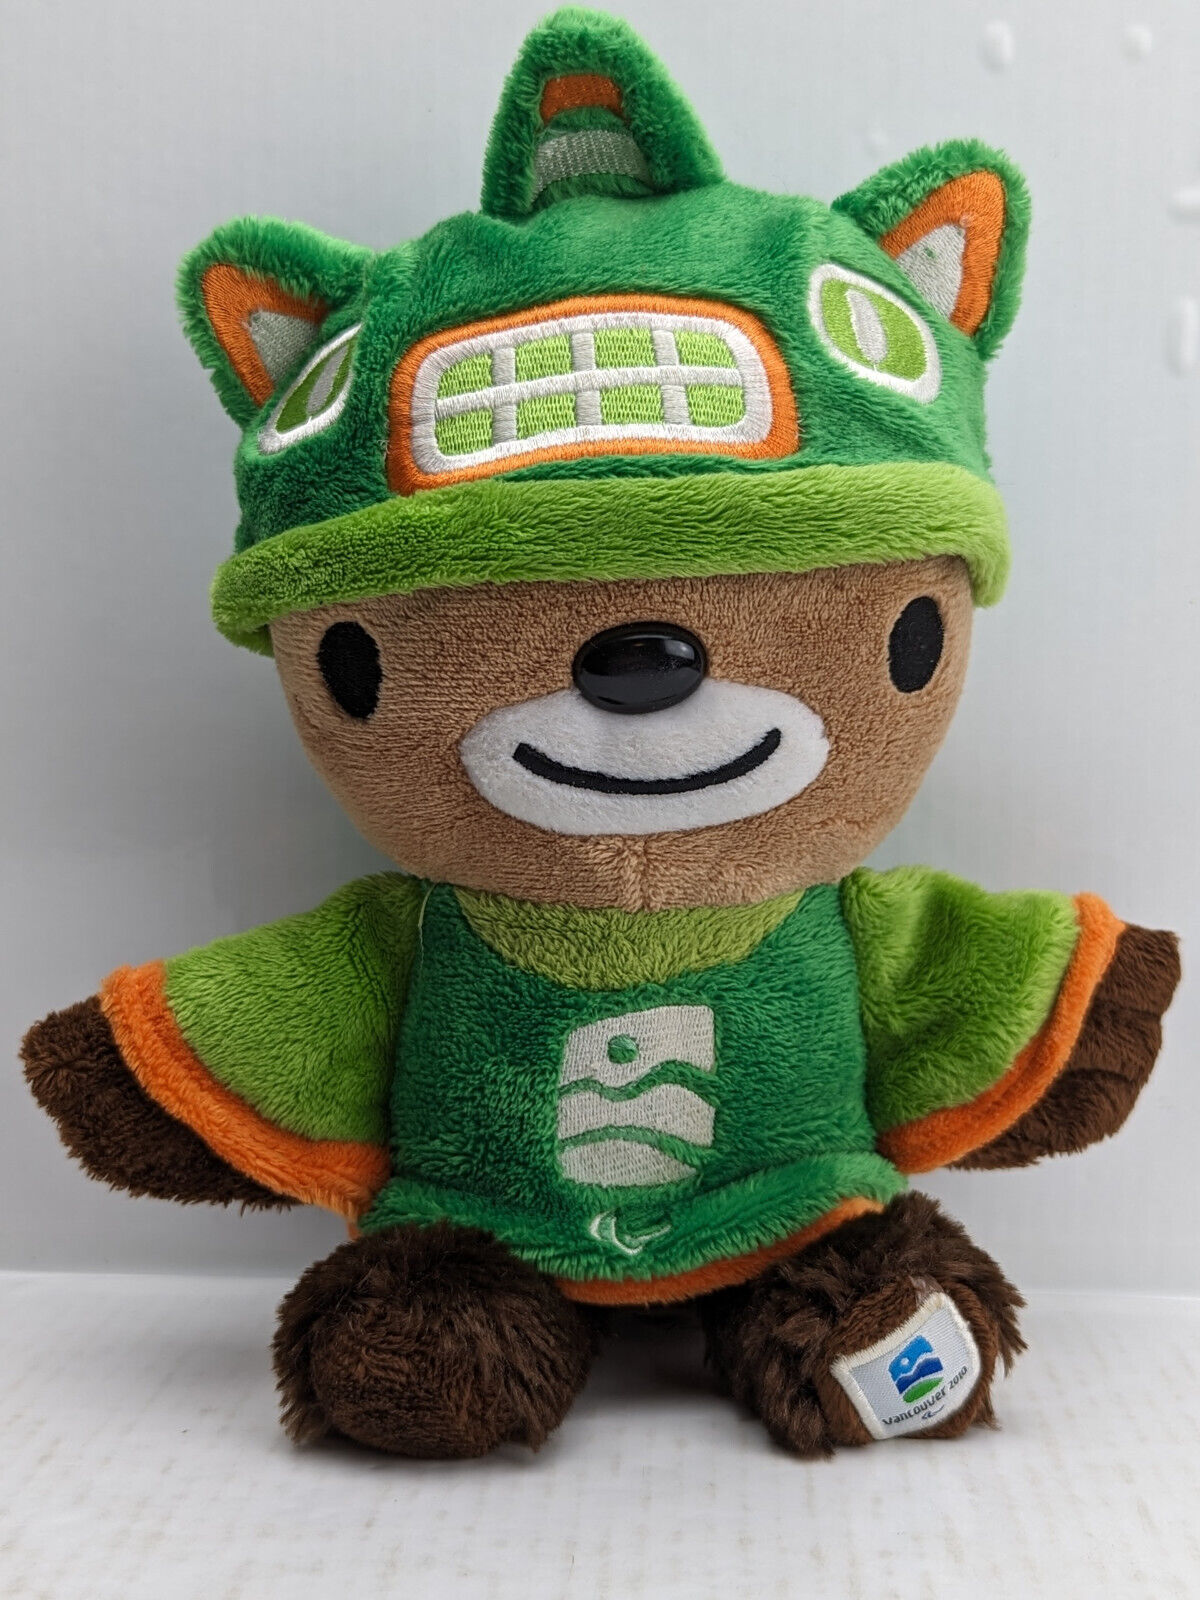 Vancouver 2010 Winter Olympics SUMI 22cm Plush Toy Green PreOwned